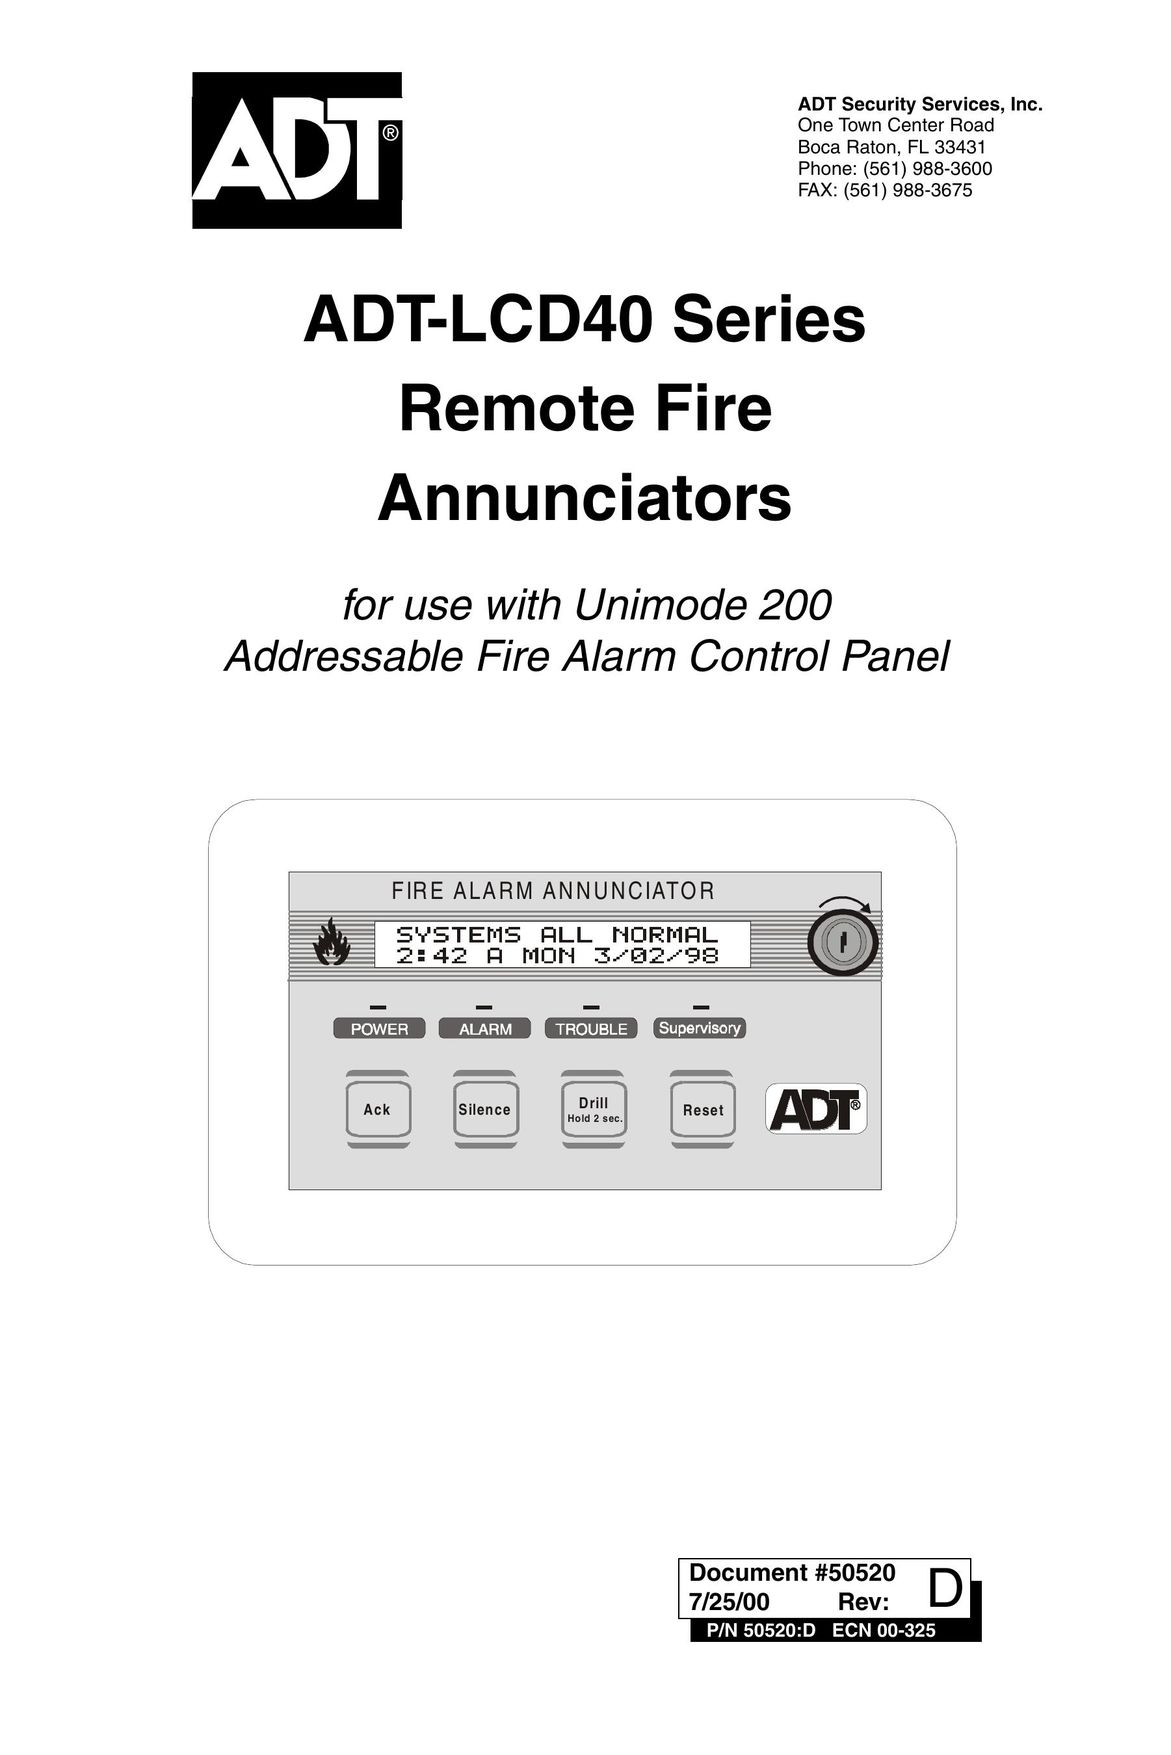 ADT Security Services ADT-LCD40 Smoke Alarm User Manual